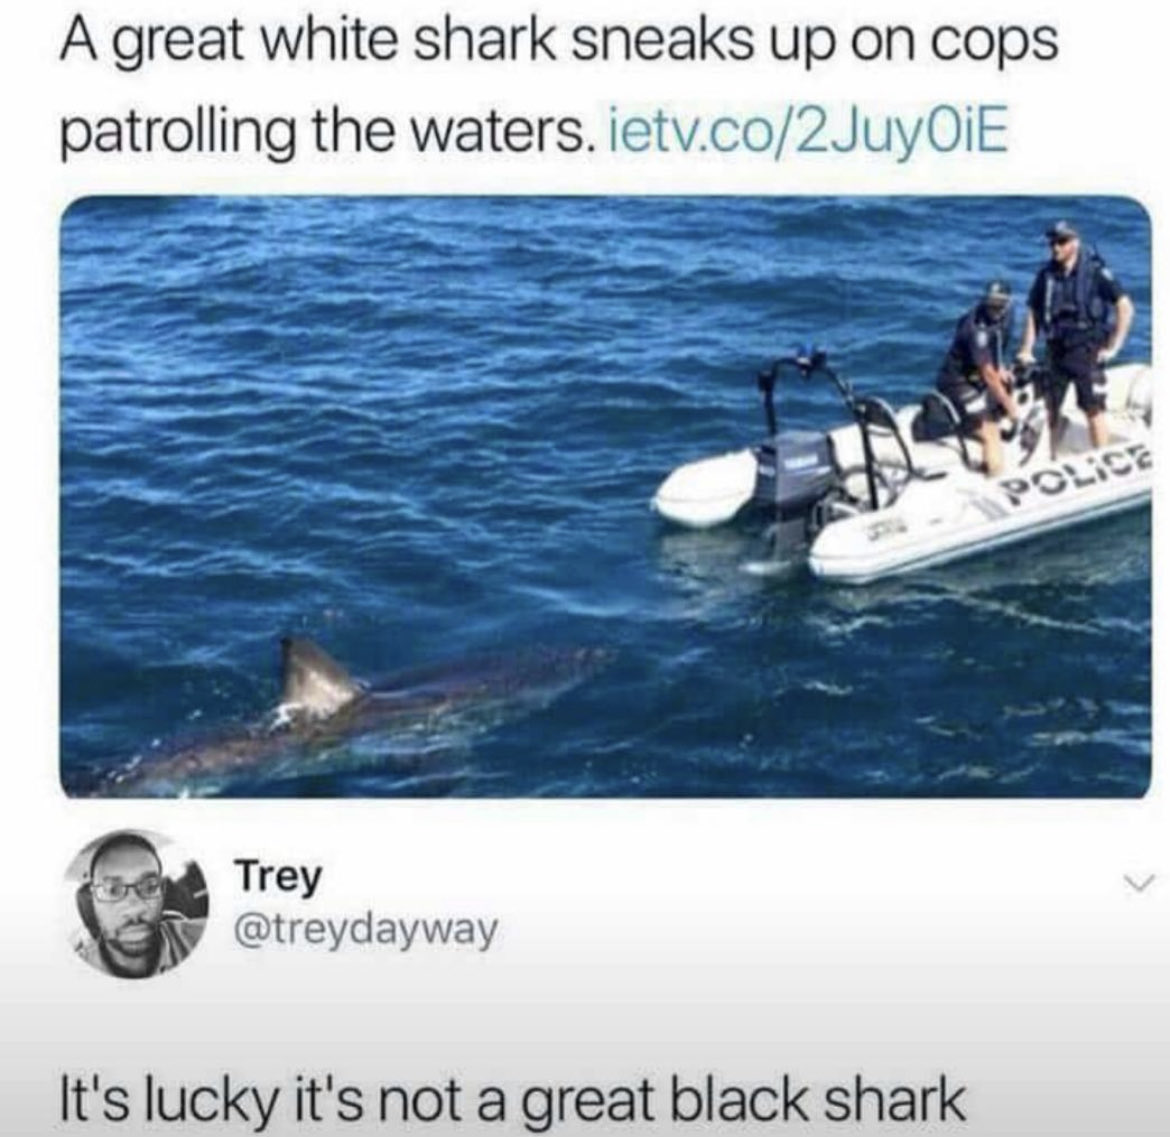 great white shark boat - A great white shark sneaks up on cops patrolling the waters. ietv.co2Juy0iE Trey It's lucky it's not a great black shark Police